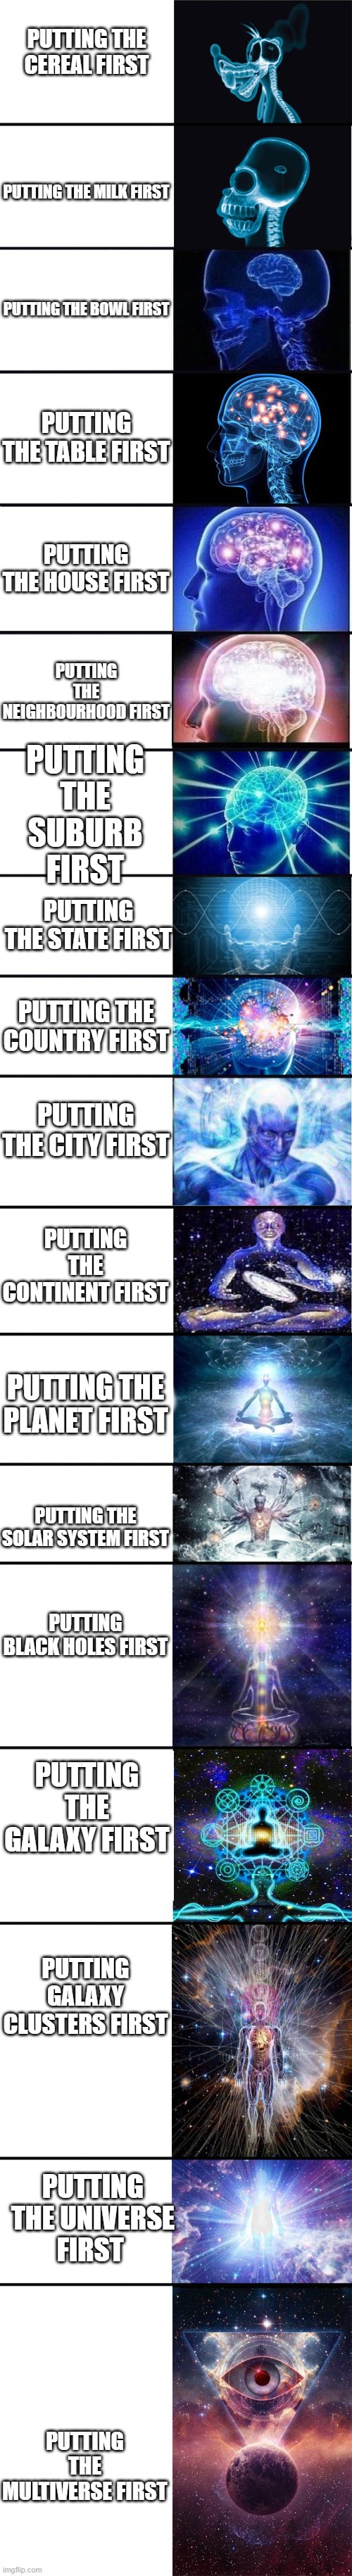 expanding brain: 9001 | PUTTING THE CEREAL FIRST; PUTTING THE MILK FIRST; PUTTING THE BOWL FIRST; PUTTING THE TABLE FIRST; PUTTING THE HOUSE FIRST; PUTTING THE NEIGHBOURHOOD FIRST; PUTTING THE SUBURB FIRST; PUTTING THE STATE FIRST; PUTTING THE COUNTRY FIRST; PUTTING THE CITY FIRST; PUTTING THE CONTINENT FIRST; PUTTING THE PLANET FIRST; PUTTING THE SOLAR SYSTEM FIRST; PUTTING BLACK HOLES FIRST; PUTTING THE GALAXY FIRST; PUTTING GALAXY CLUSTERS FIRST; PUTTING THE UNIVERSE FIRST; PUTTING THE MULTIVERSE FIRST | image tagged in expanding brain,expanding brain 9001 | made w/ Imgflip meme maker